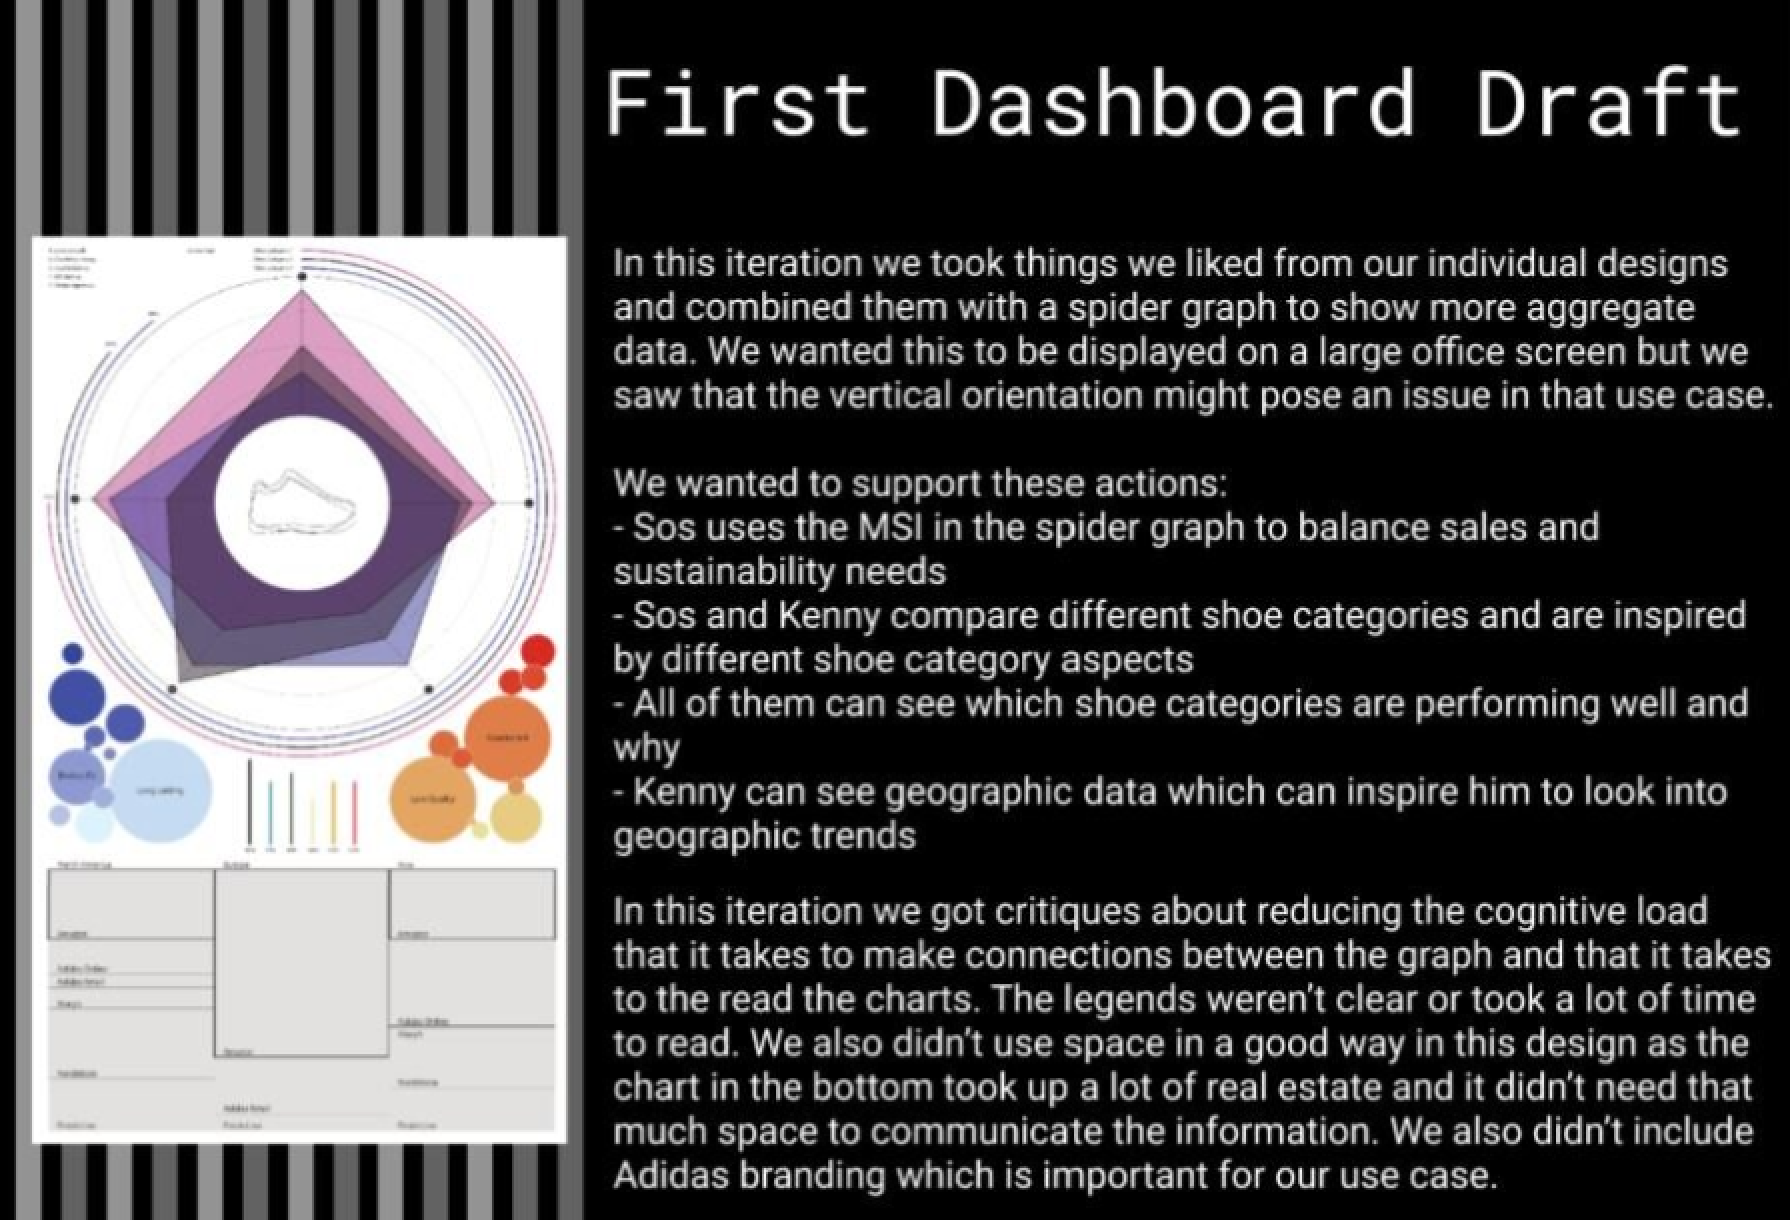 On the left there is an a low-fi prototype of the dashboard. The dashboard has a spider graph showing different metrics of the selected shoe with differnt sized bubbles around it showing user feedback and below a a box chart showing different geographic data. On the right there is a summary of findings that says 'In this iteration we took things we liked from our individual designs and combined them with a spider graph to show more aggregate data. We wanted to support these actions: Sos uses the MSI in the spider graph to balance sales and sustainability, Sos and Kenny compare differnt shoe categories and are inspired by different shoe category aspects, All of them can see which shoe categories are performing well and why, and Kenny can see geographic data which can inspire him to look into geographic trends.